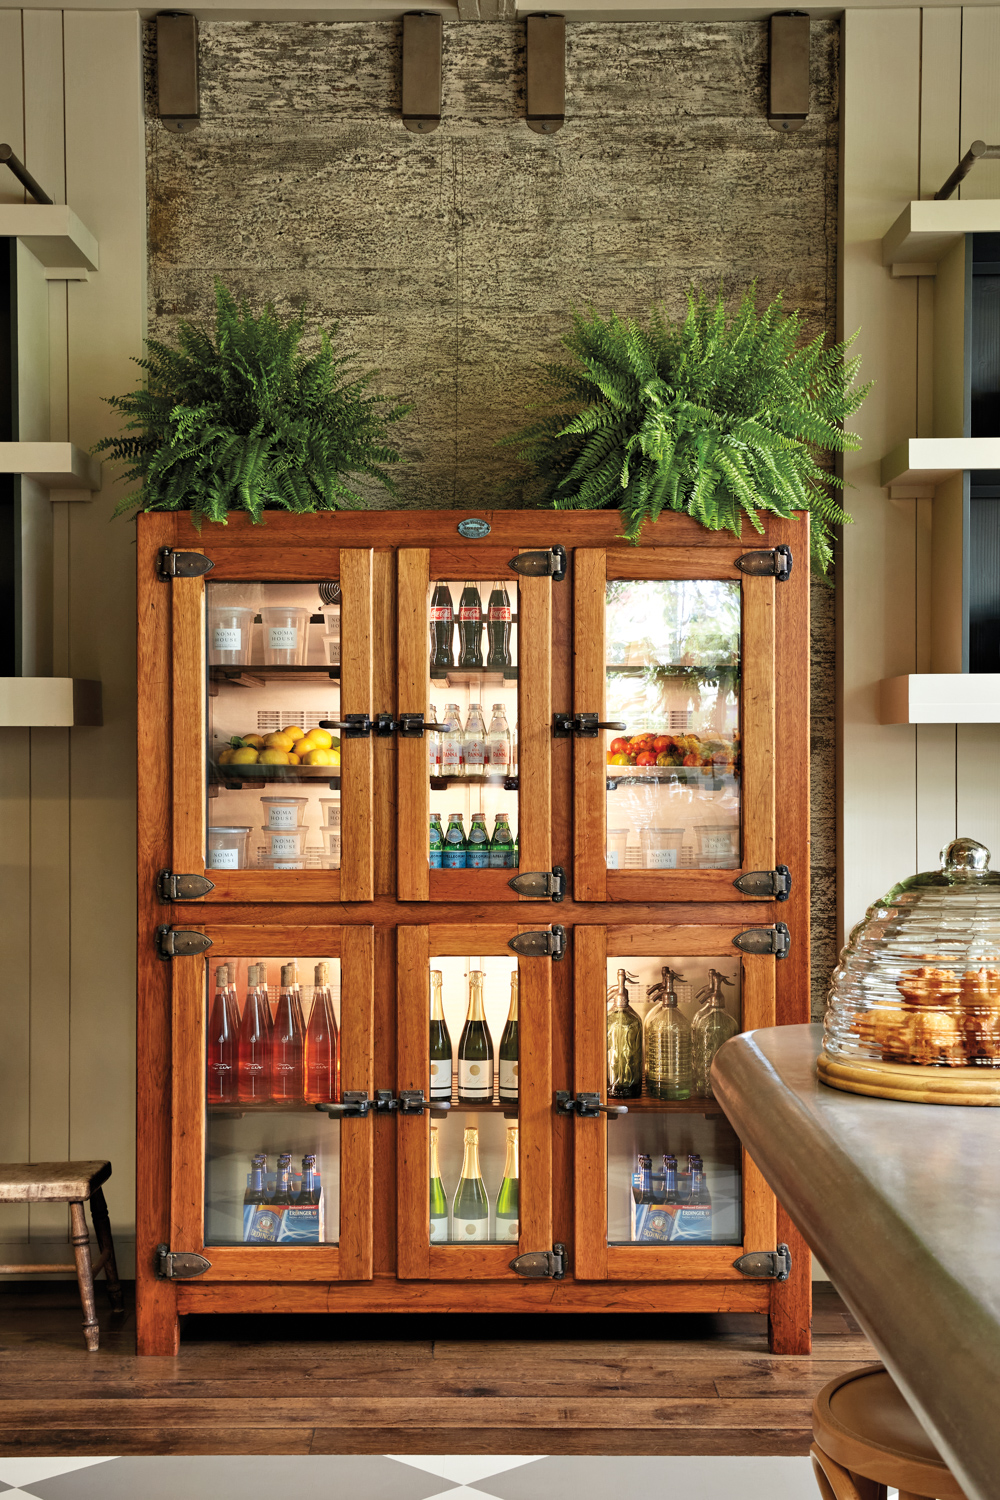 Wooden drink cabinet topped with ferns and set against a textured green wall